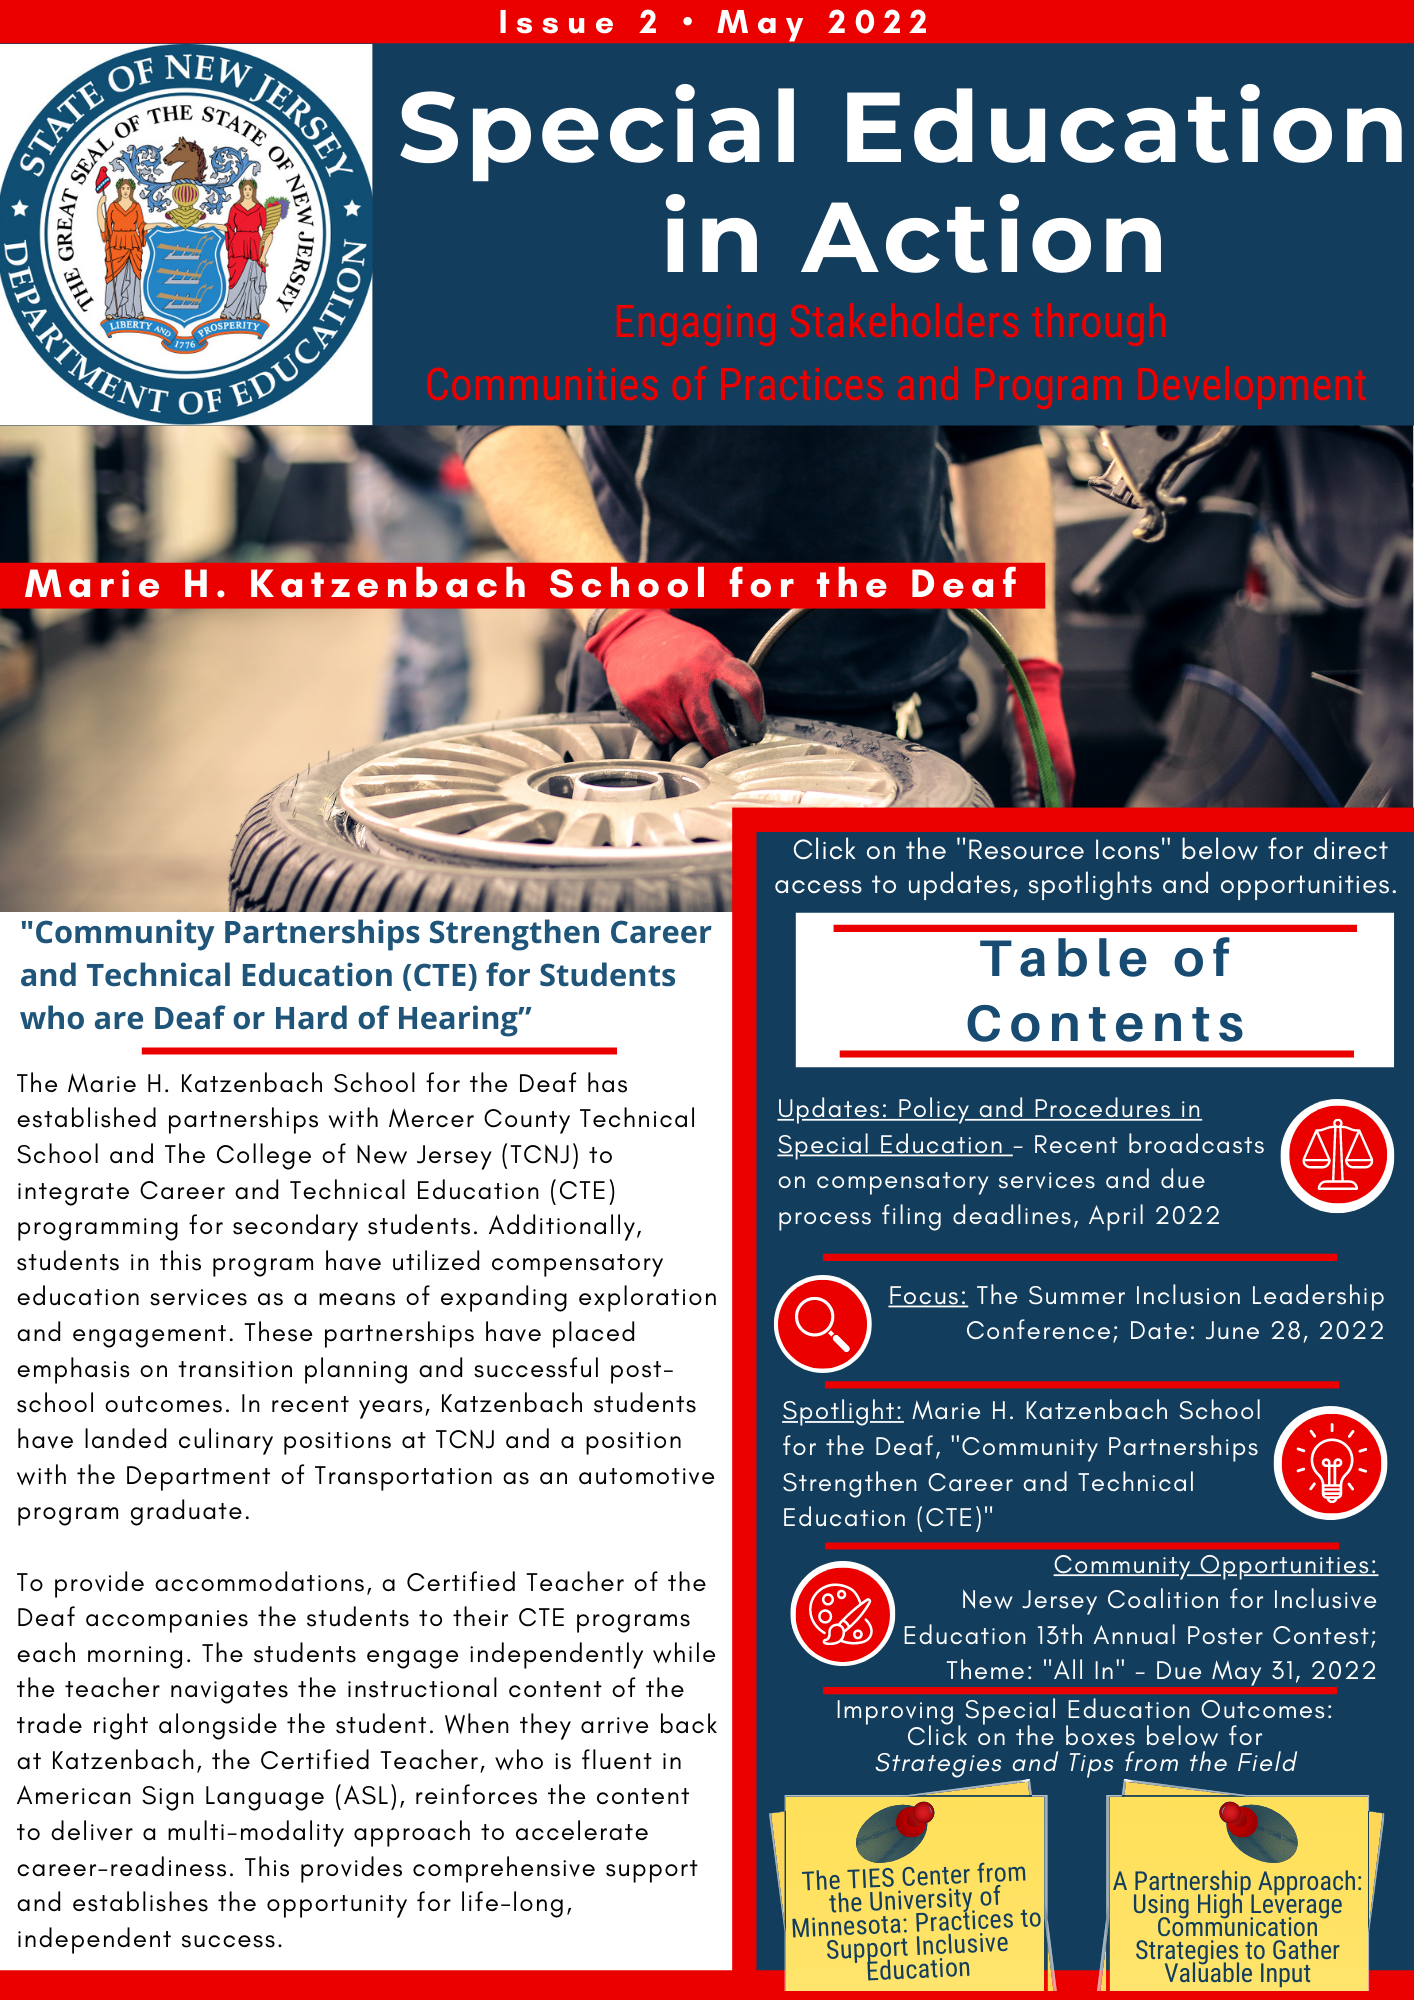 The cover of the 2ndt issued newsletter for special education in action